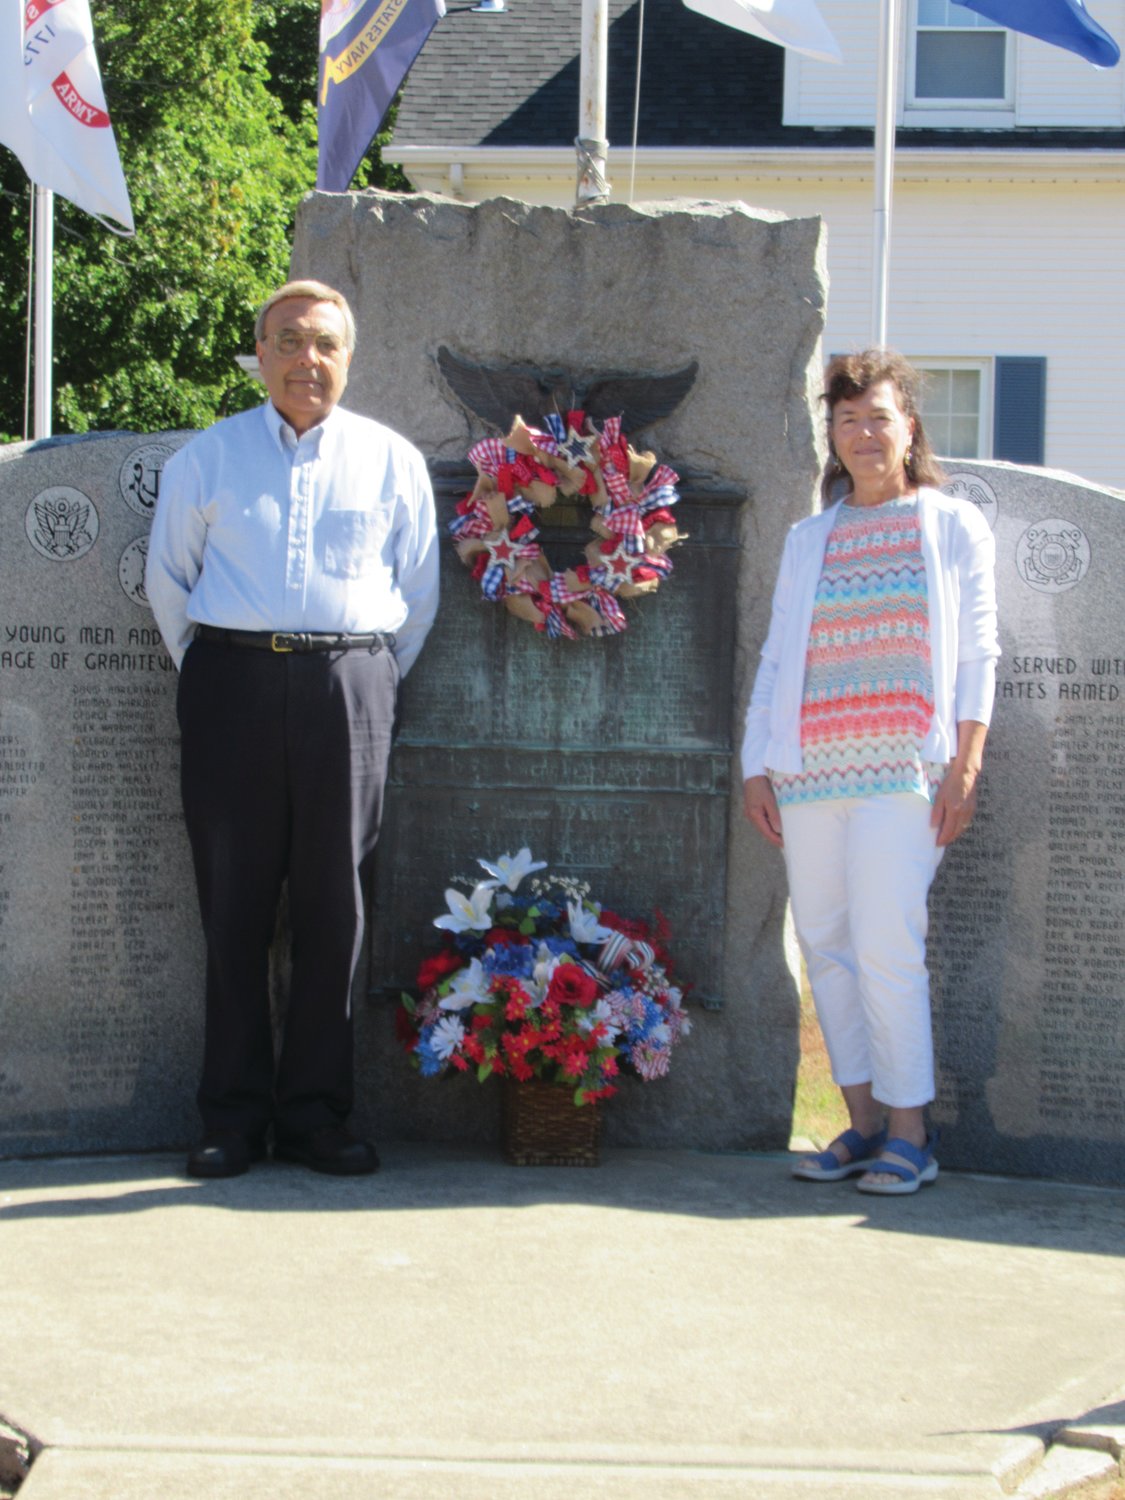 PERFECT PLACEMENT: Marie-Carlino Butera and Steven Morra had the honor of placing the wreath and flowers in front of the famous Graniteville monuments during the recent VJ Day ceremony.